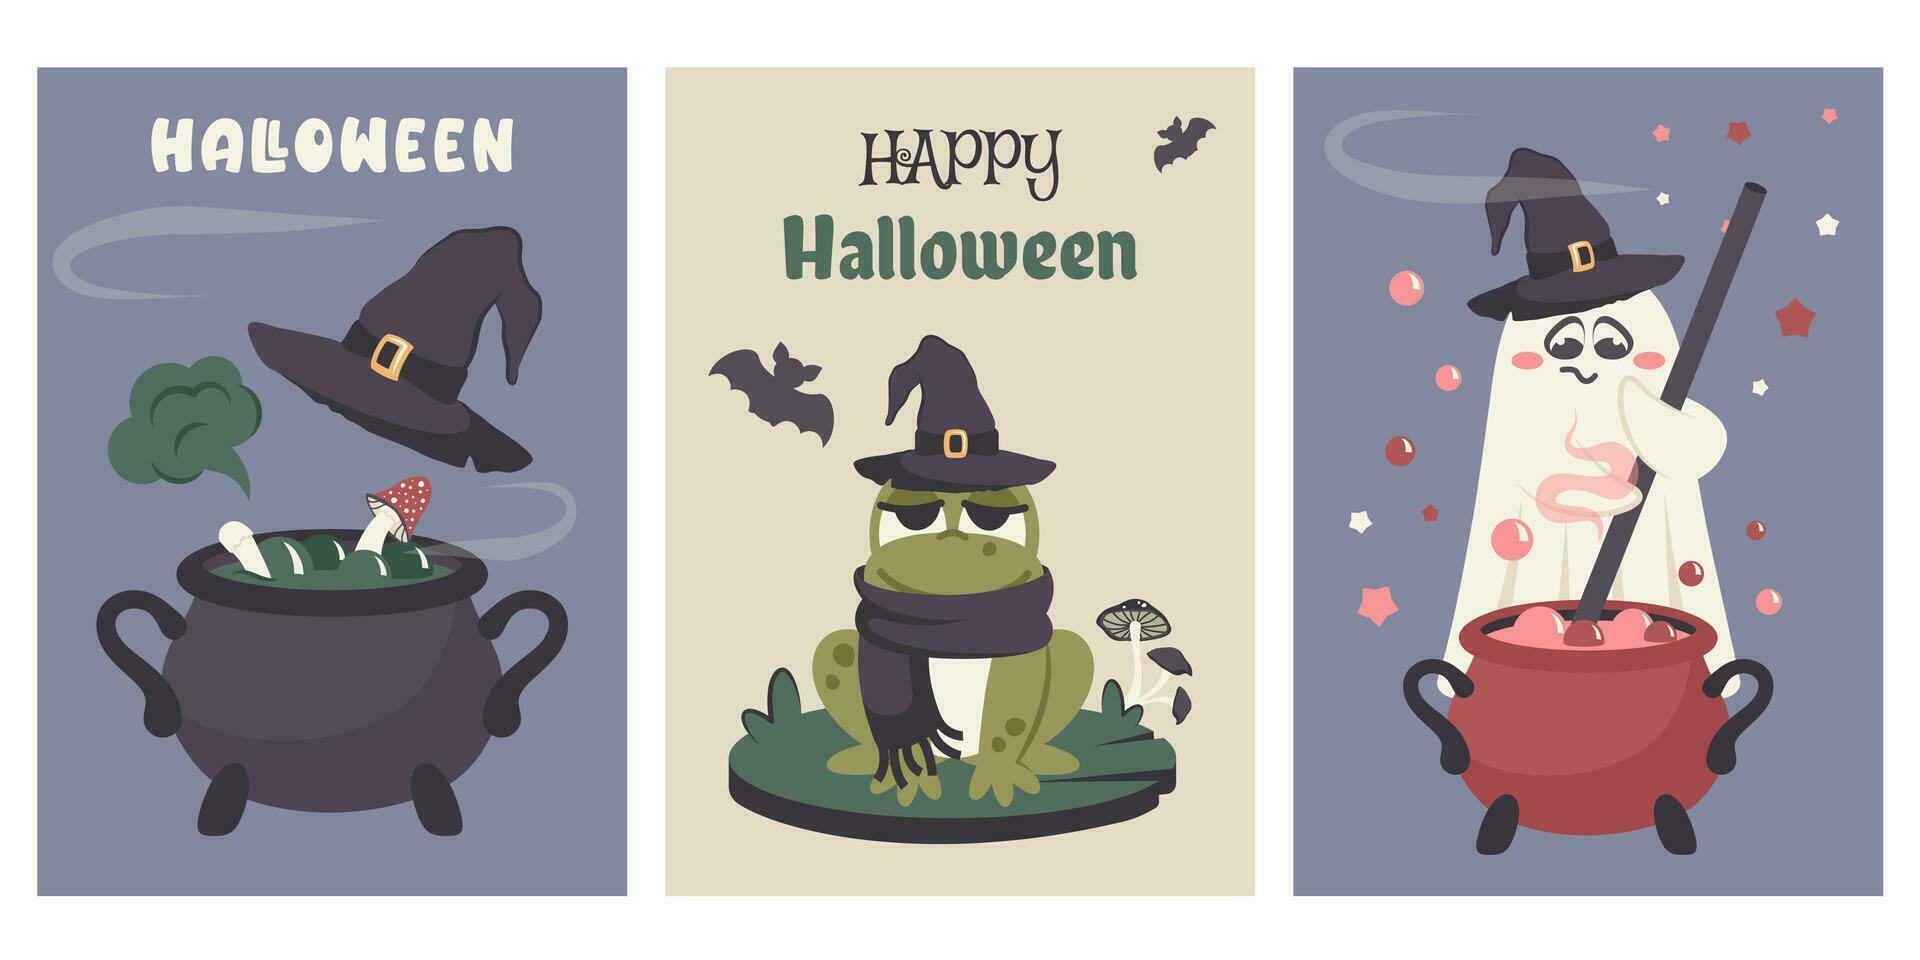 Set of greeting cards to Happy Halloween party. Hand drawn doodle Cute ghost, wizard's hat, funny frog, bat silhouette, potion cauldron, greeting text.Vector illustration for invitation, print vector